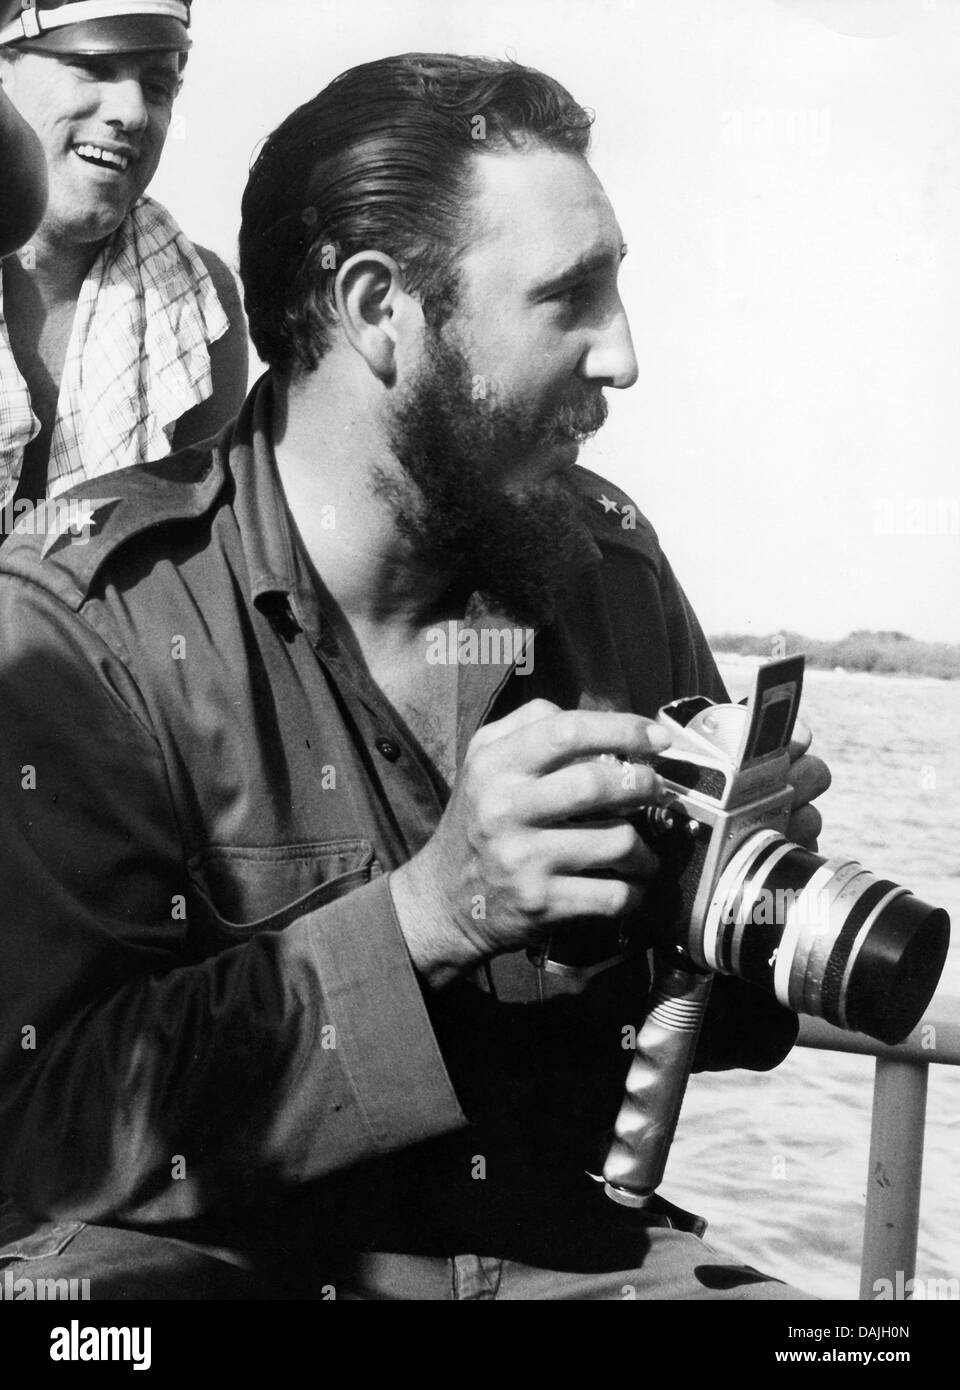 (file) - A dpa file picture dated 01 January 1962 shows Cuban leader Fidel Castro during a visit to the Bay of Pigs on the southern coast of Cuba. On 17 April 1961, CIA-trained and -equipped Cuban exiles landed here in an attempt to topple the Castro regime. The failed coup attempt resulted in a permanent deterioration of US-Cuban relations. Photo: Heinz Junge Stock Photo